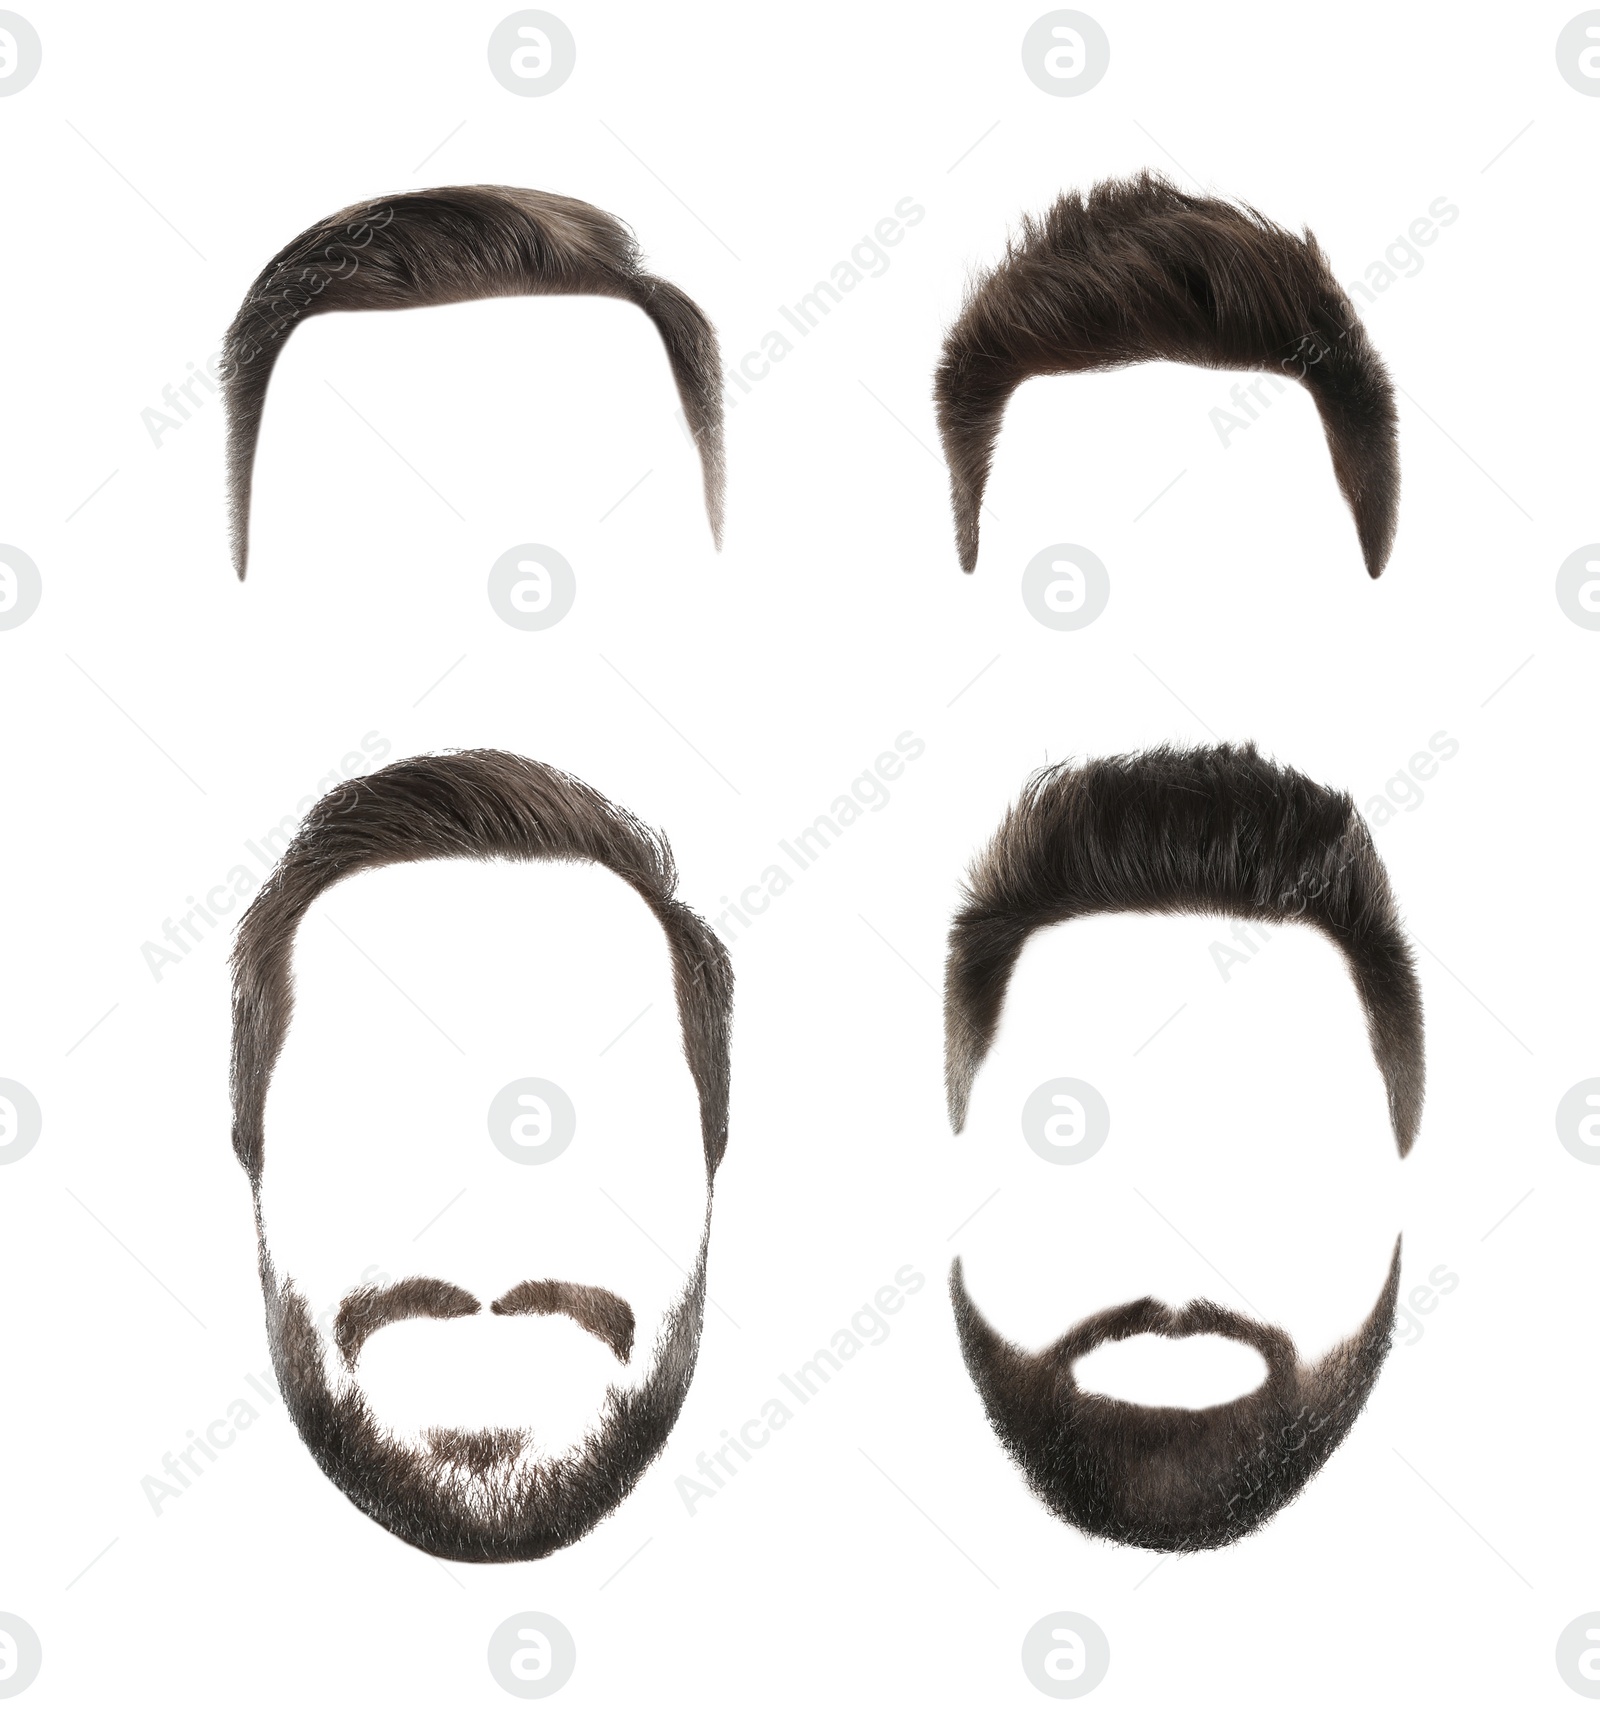 Image of Fashionable men's hairstyles and beards isolated on white, collage